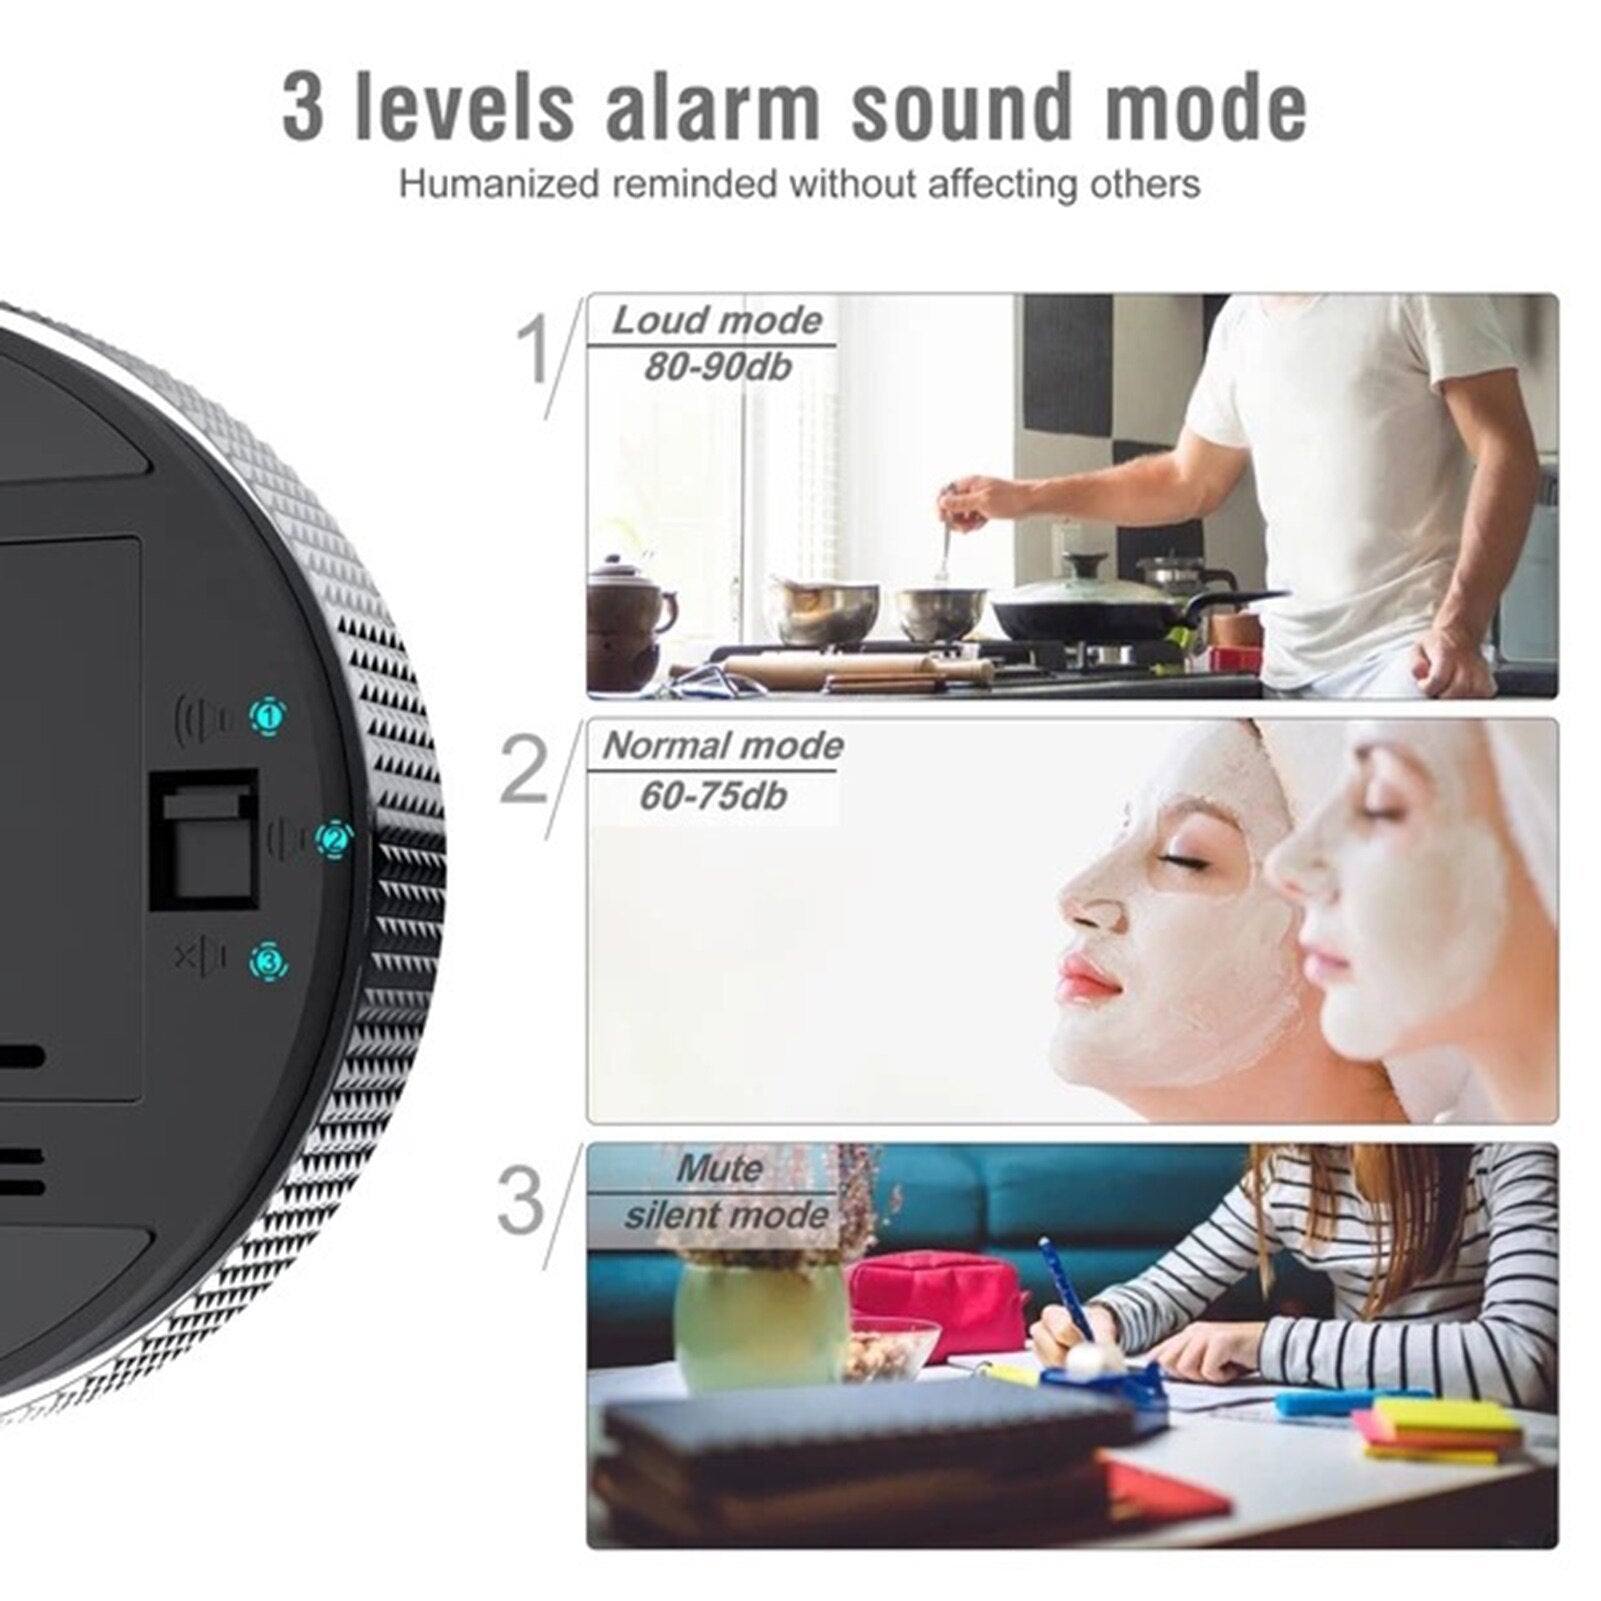 The Baseus Magnetic Digital Timer has 3 mode levels of alarm sounds, mode 1. Loud mode 80-90db. mode 2. Normal mode 60-75db. Mode 3. Mute 0db